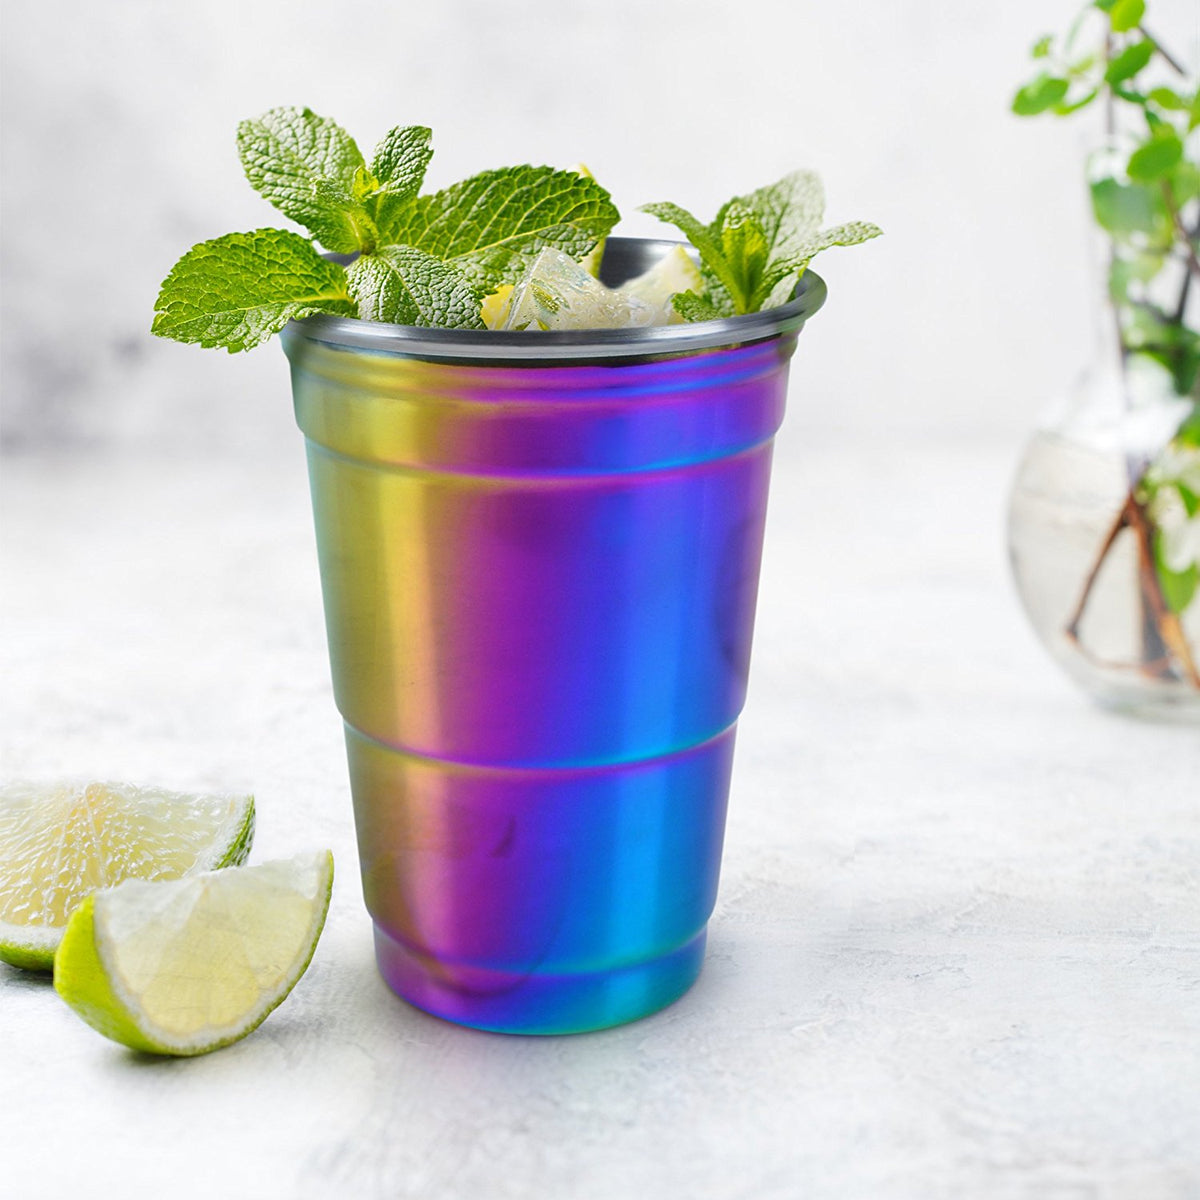 PartyRainbow™ - Premium Rainbow Iridescent Stainless Steel Party Cup